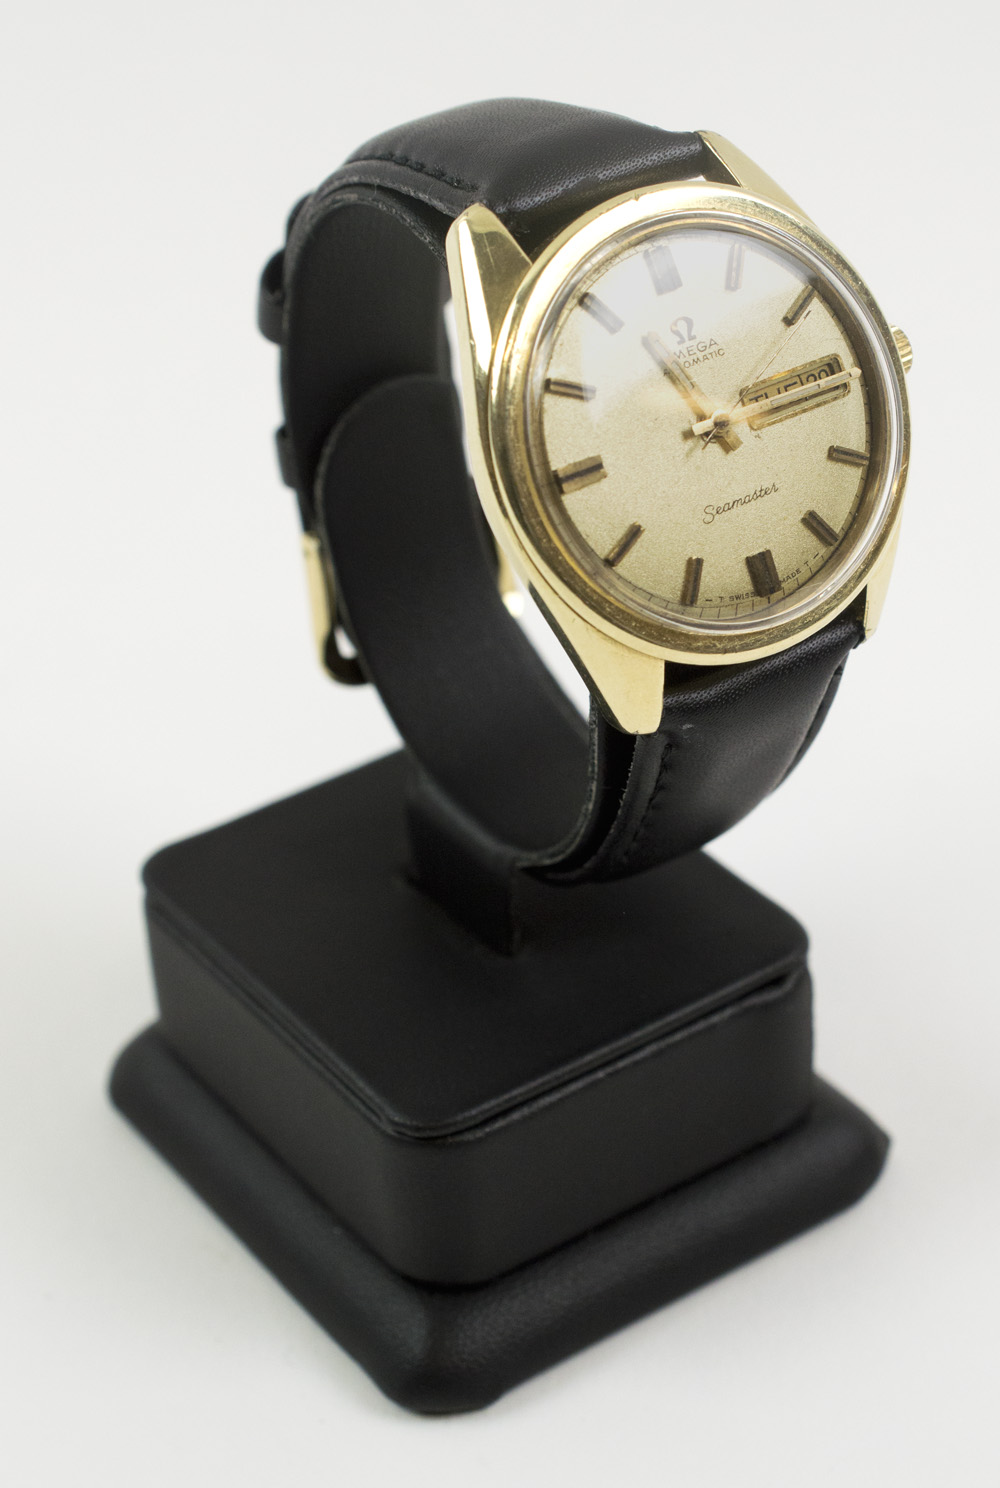 OMEGA SEAMASTER AUTOMATIC GOLD CAPPED STAINLESS STEEL GENTLEMAN'S WRISTWATCH, circa 1969, cal.